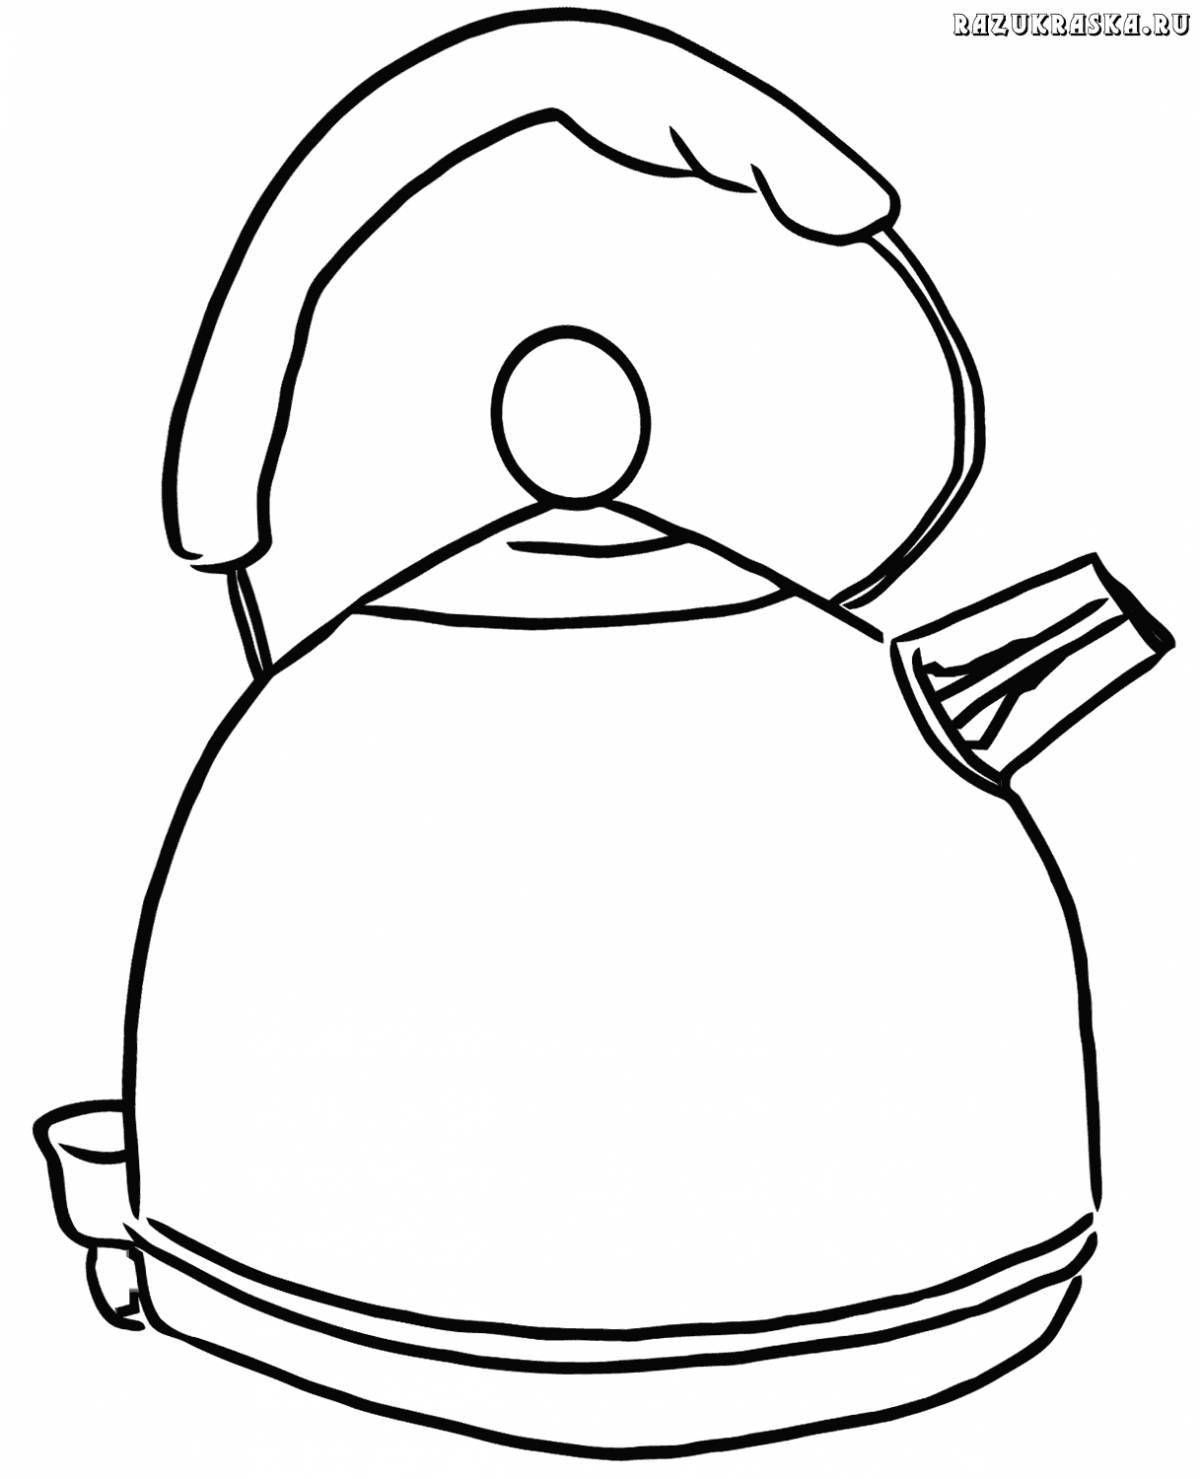 Fancy teapot coloring page for 2-3 year olds